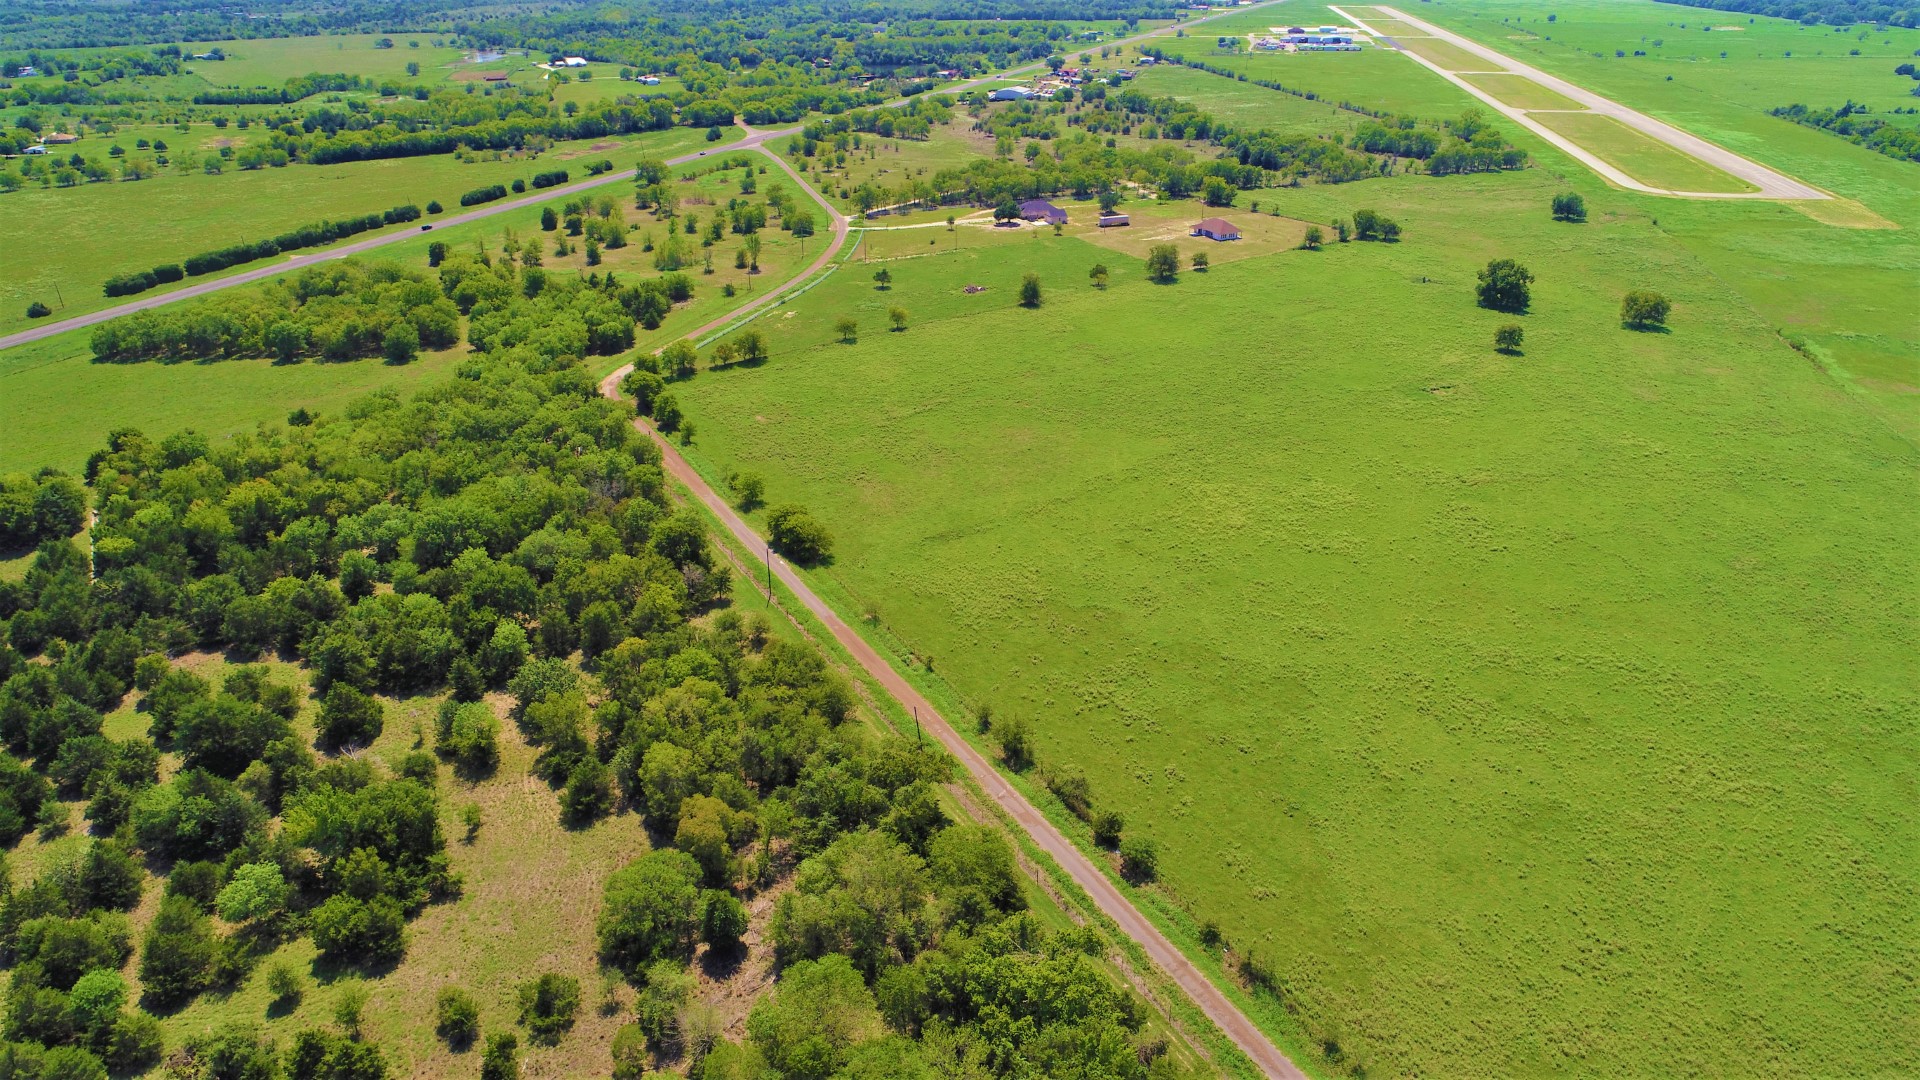 Land for Sale in Limestone County 10.99 Acres with Road Front, Drainage, Gate Entry & Power / Water. Perc Tested